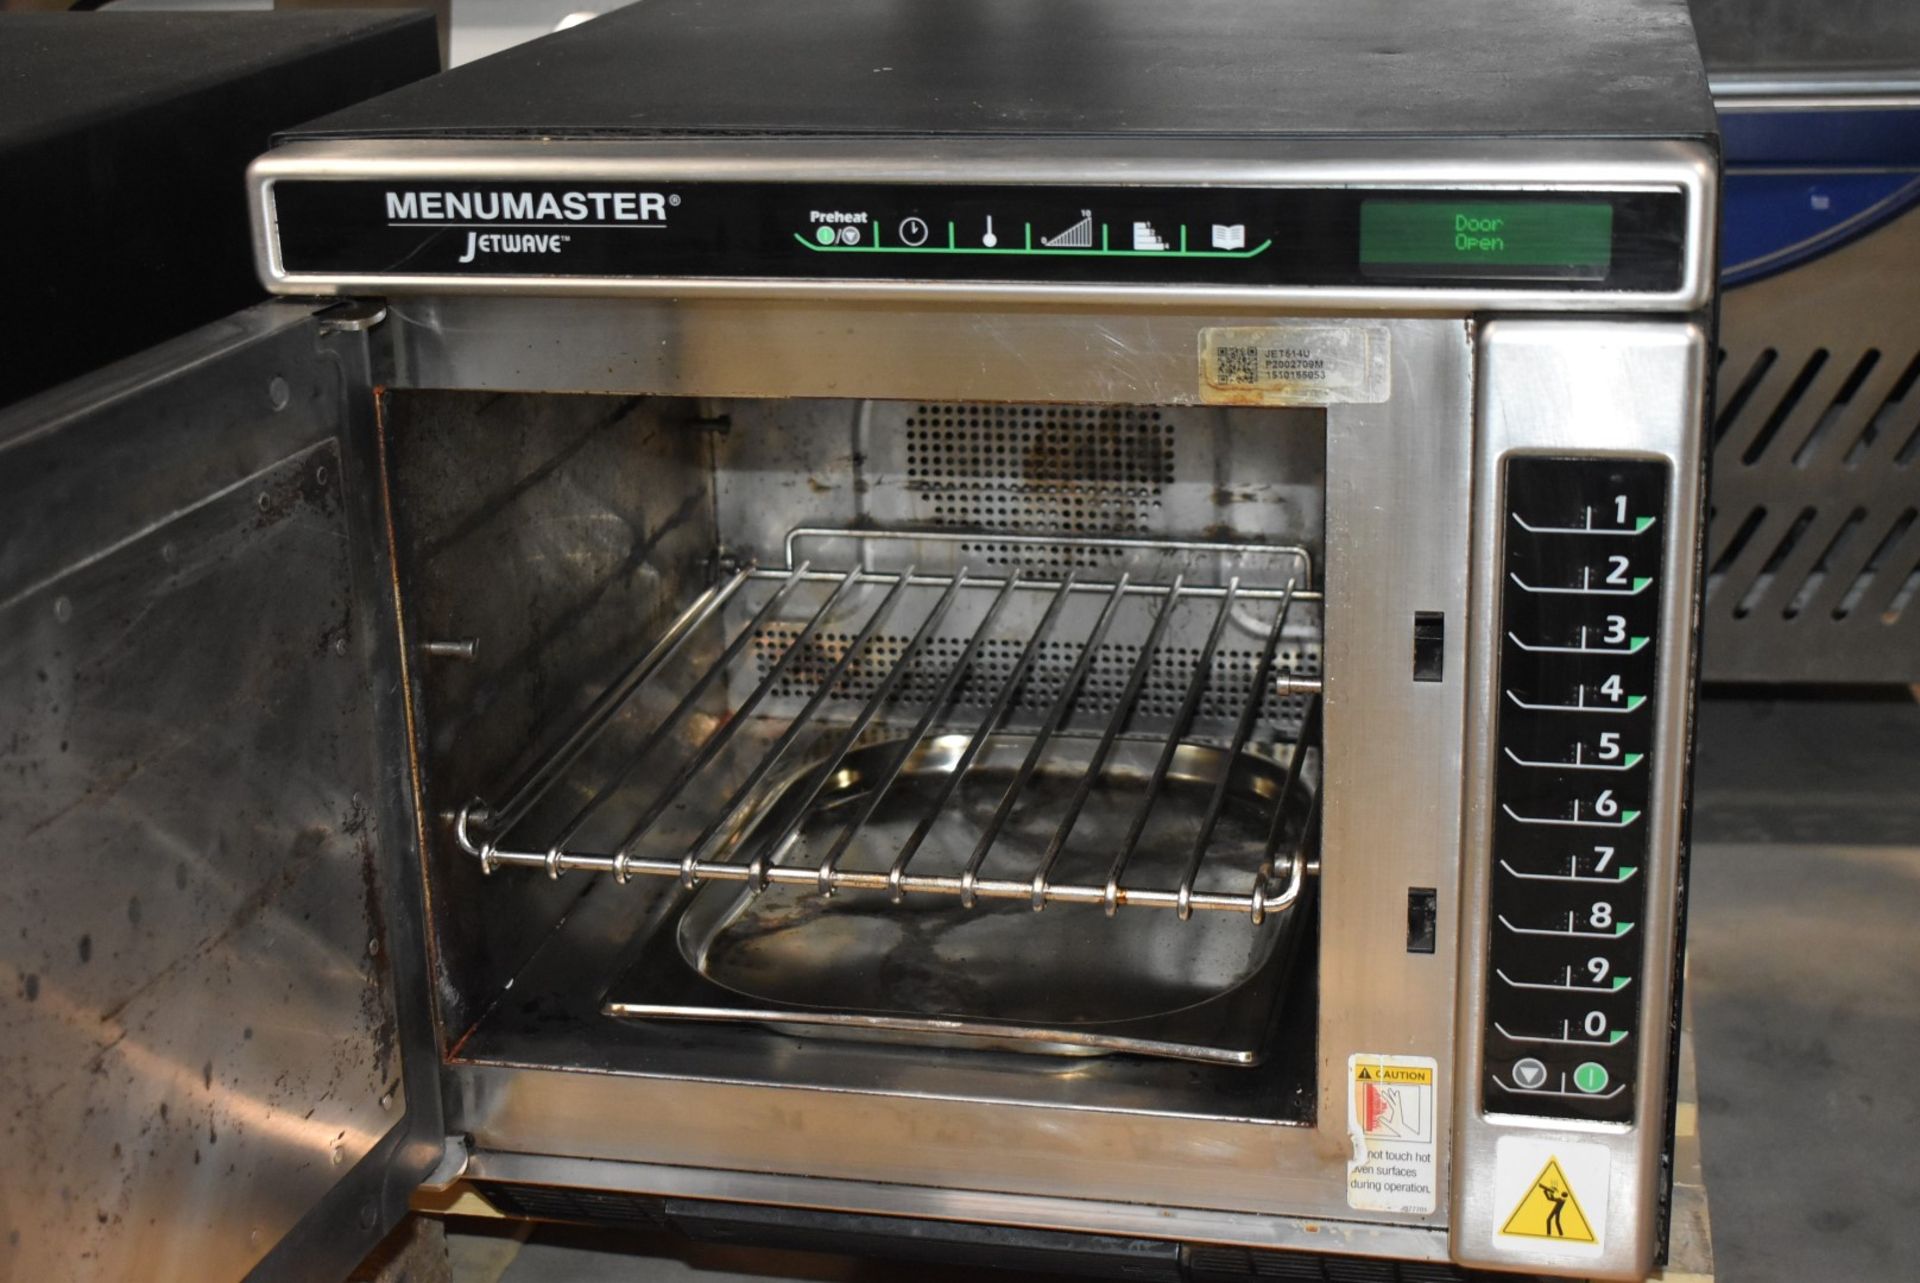 1 x Menumaster Jetwave JET514U High Speed Combination Microwave Oven - RRP £2,400 - Recently Removed - Image 3 of 11